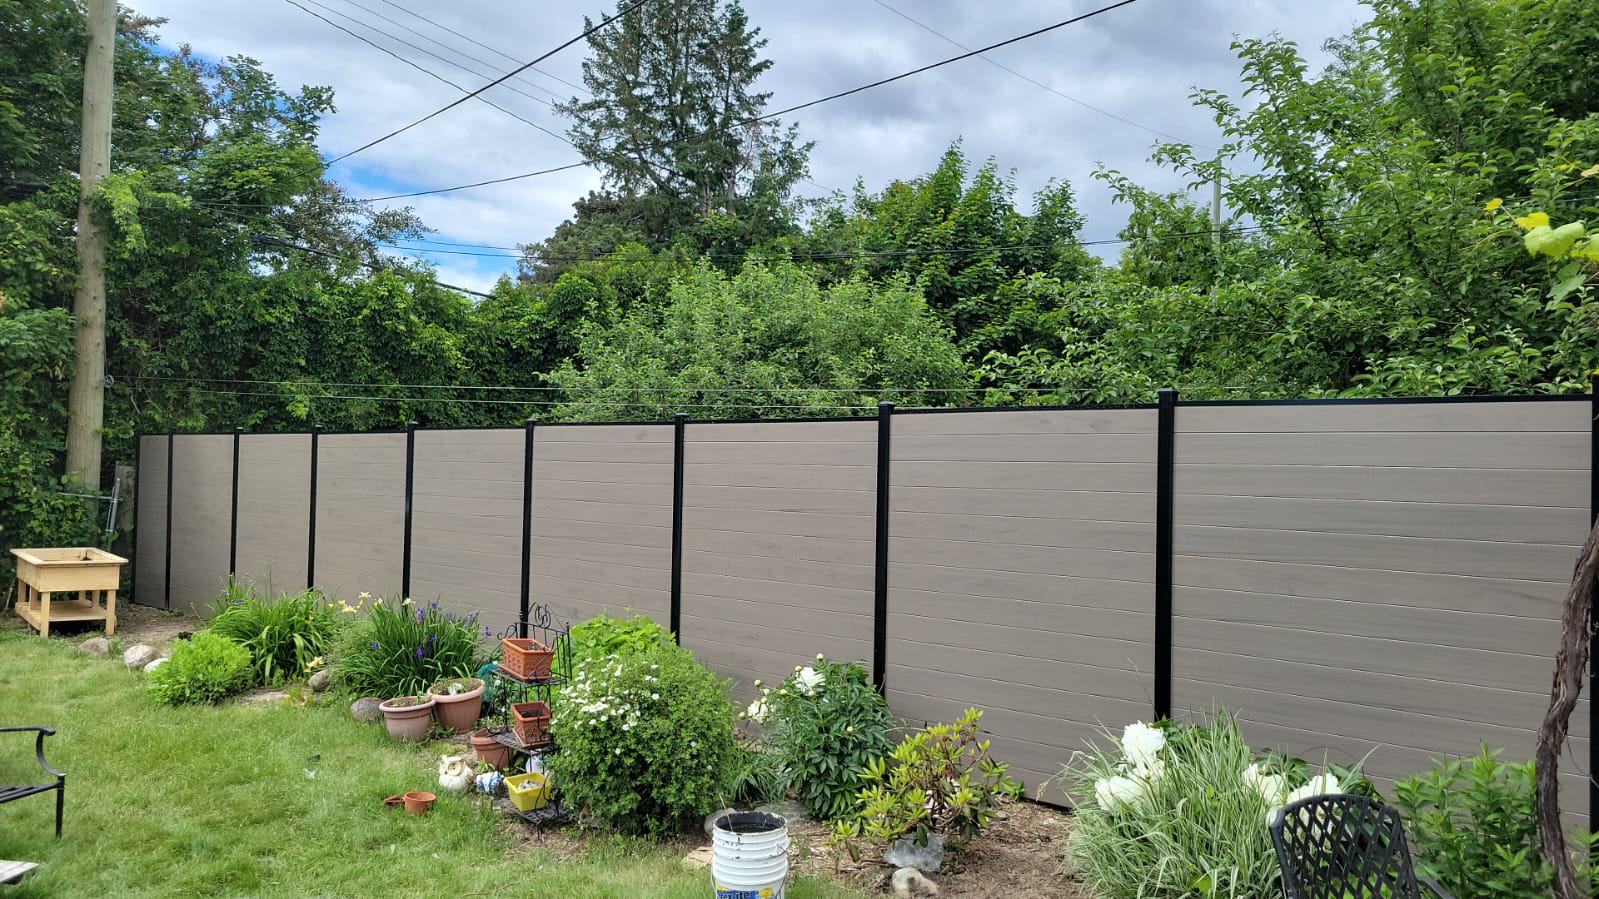 Multi-Colored ASA PVC Fence Boards - Amco Fencing And Decks Inc.